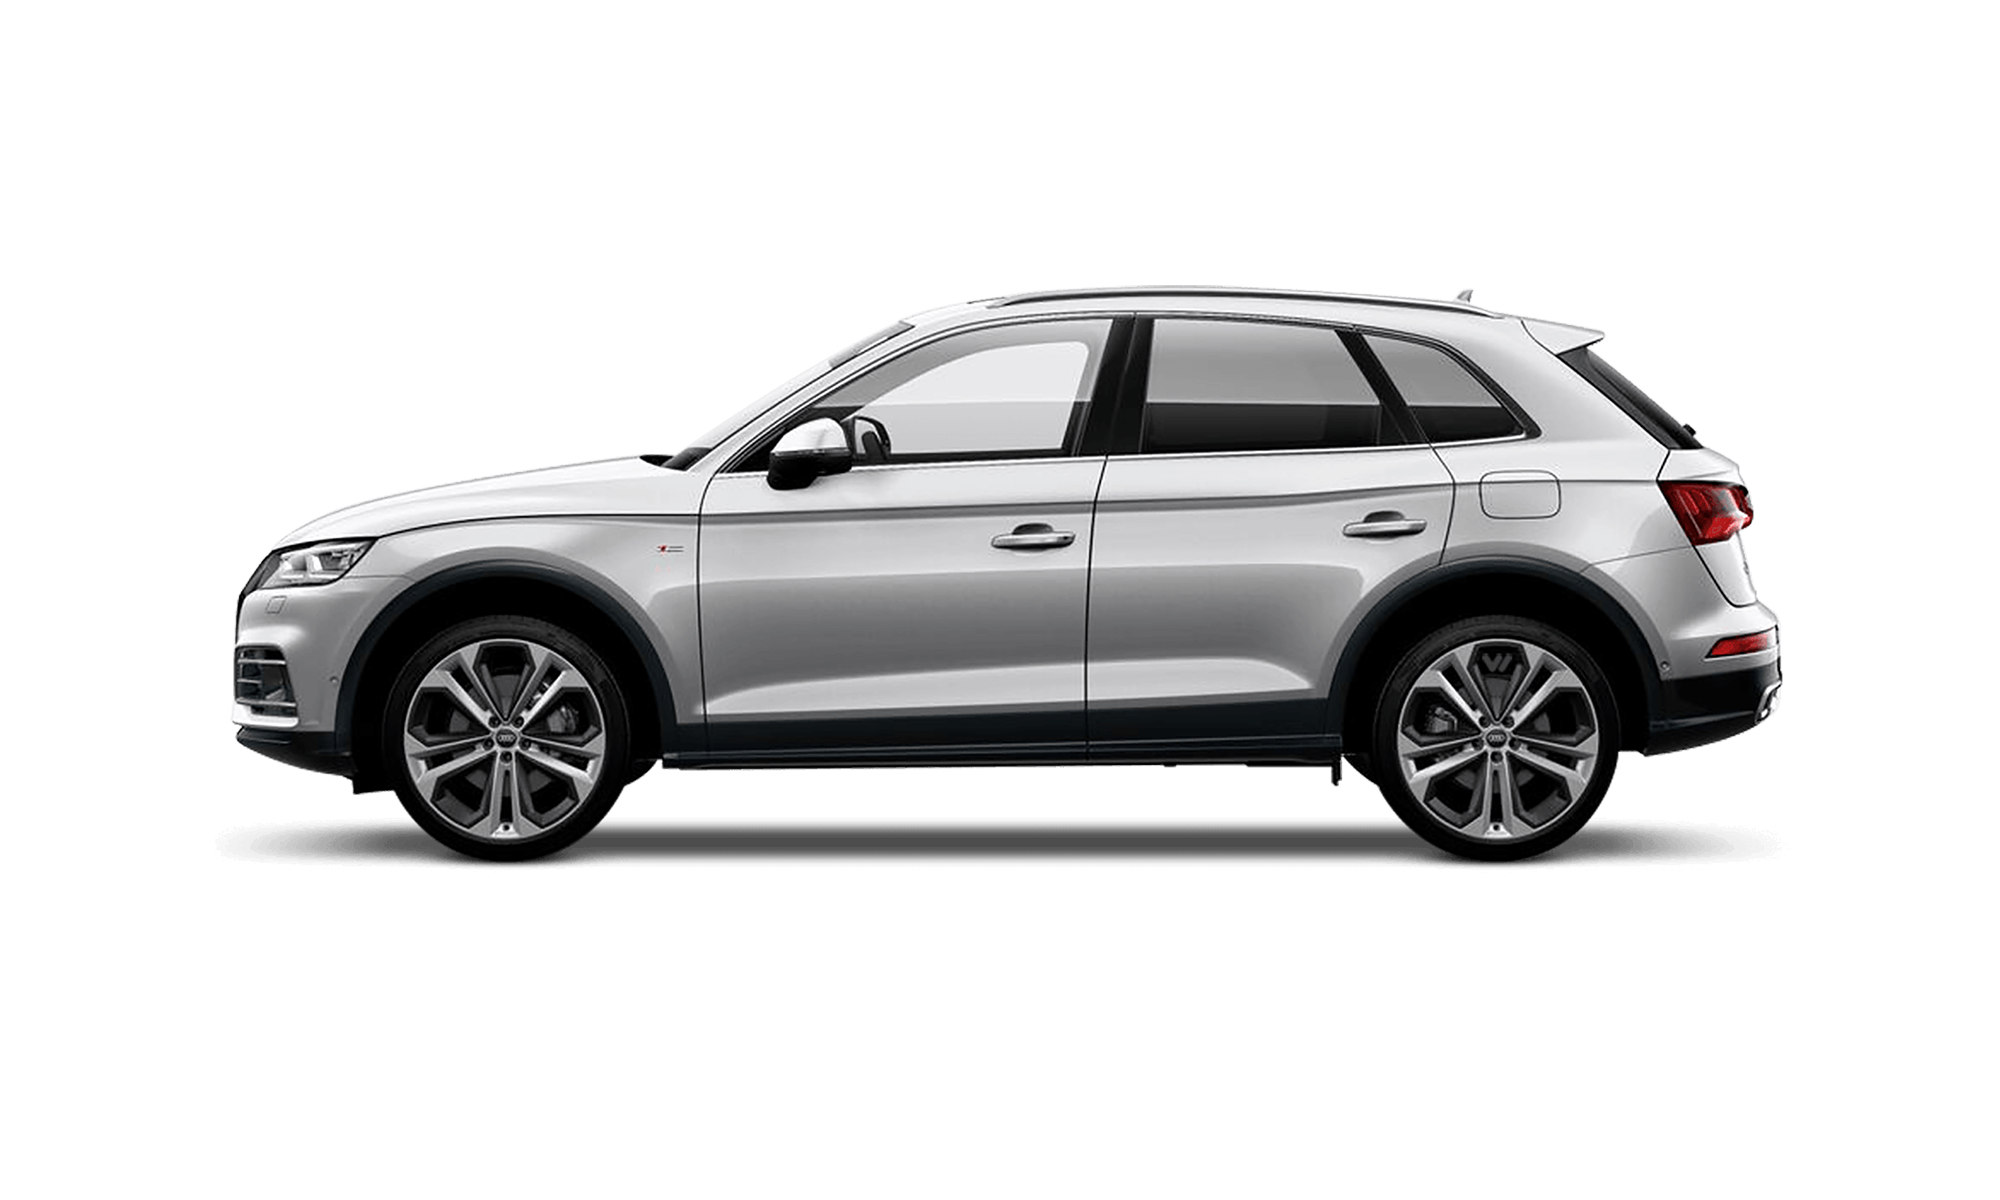 Five Things to Know About the 2019 Audi Q5 - The Car Guide